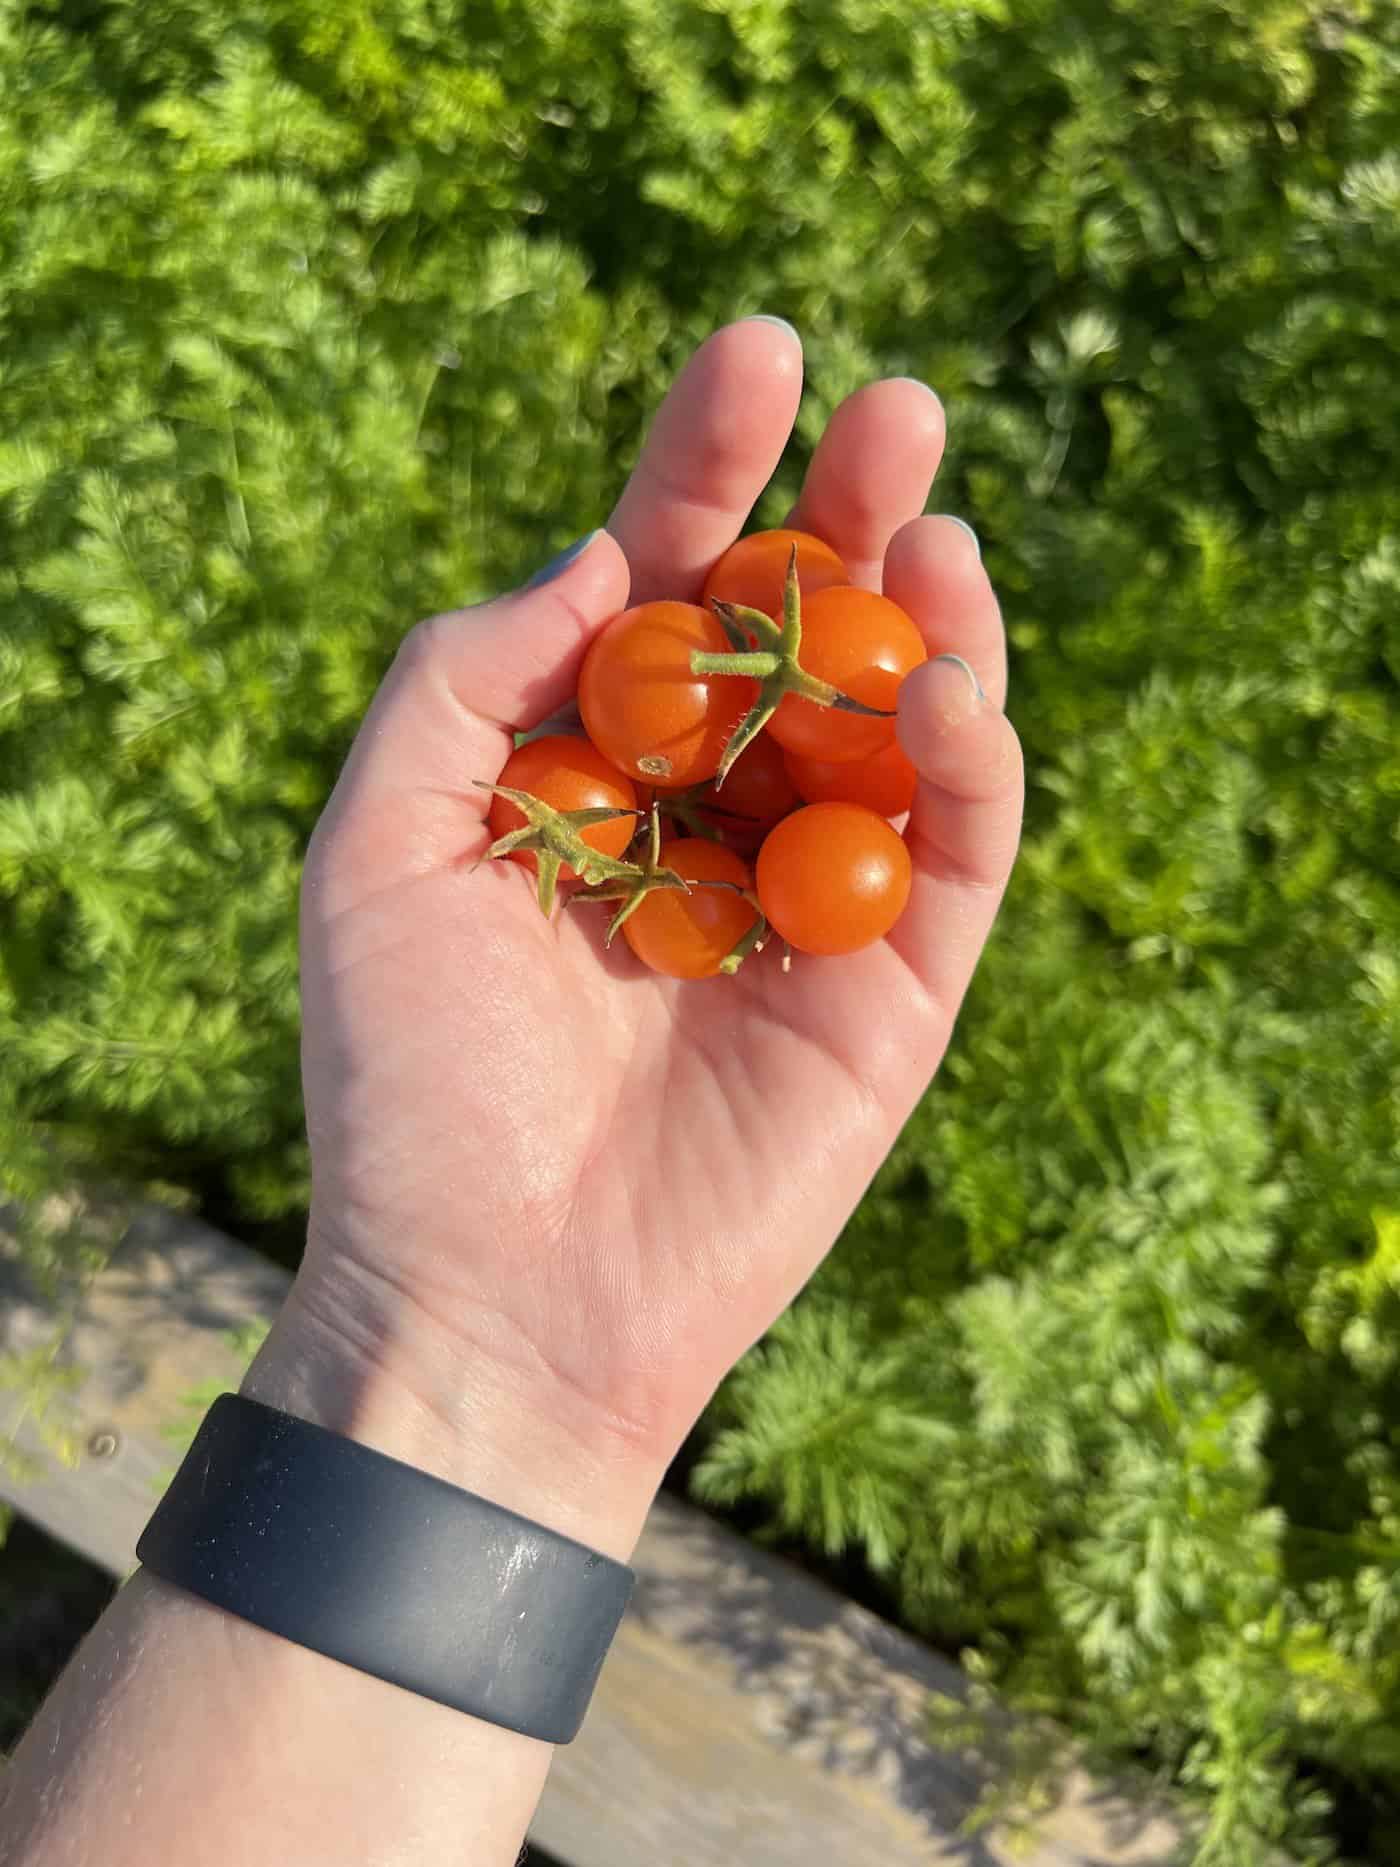 Sungold cherry tomatoes held in hand in the garden